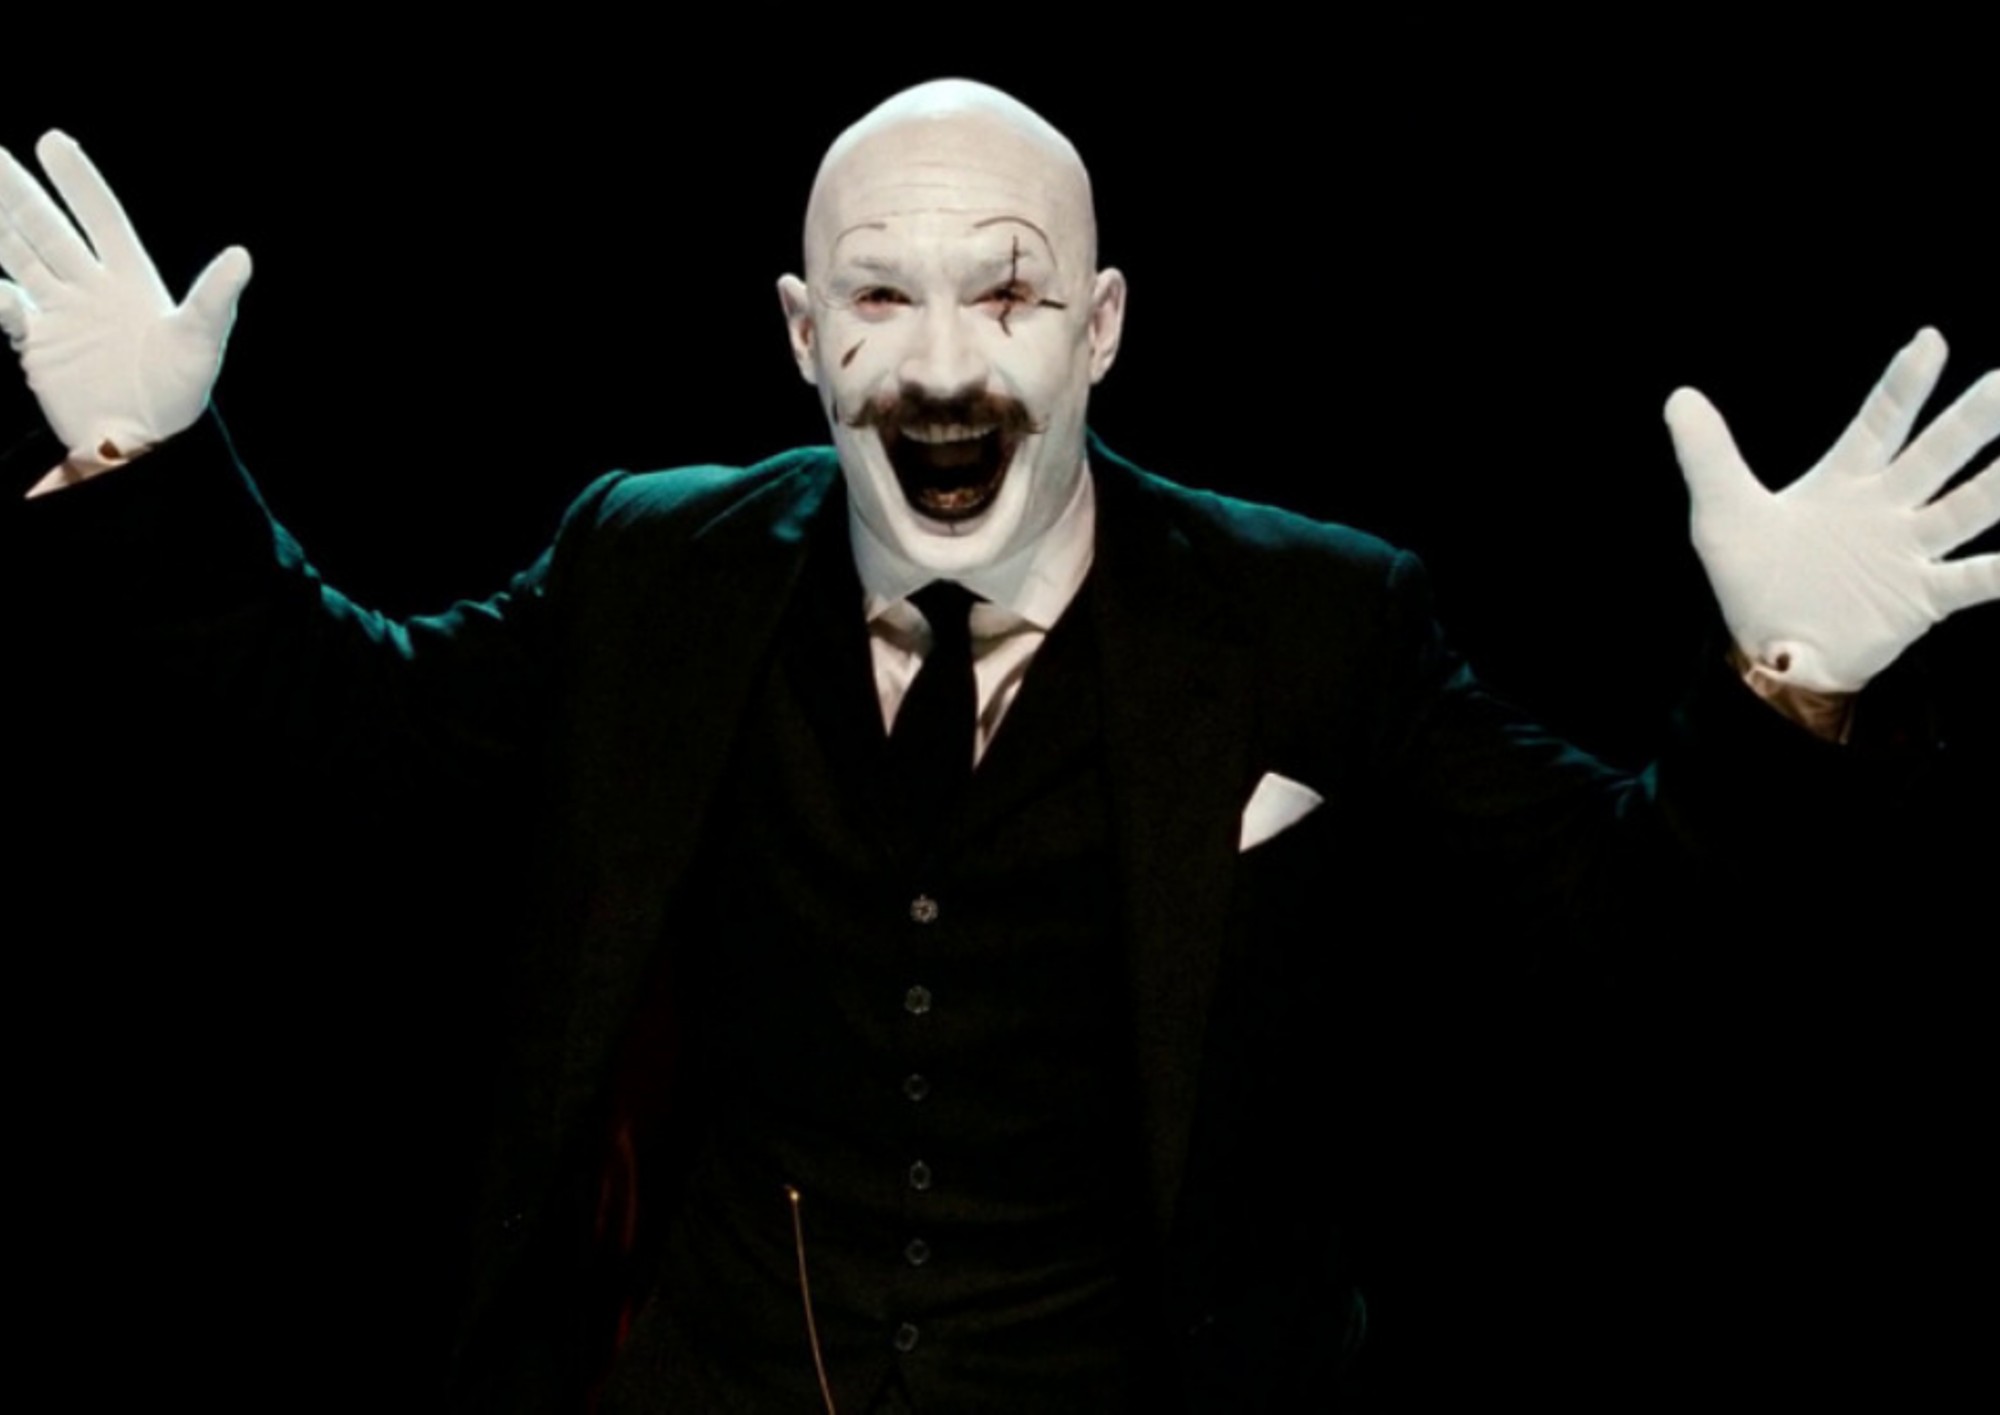 Image from the motion picture Bronson